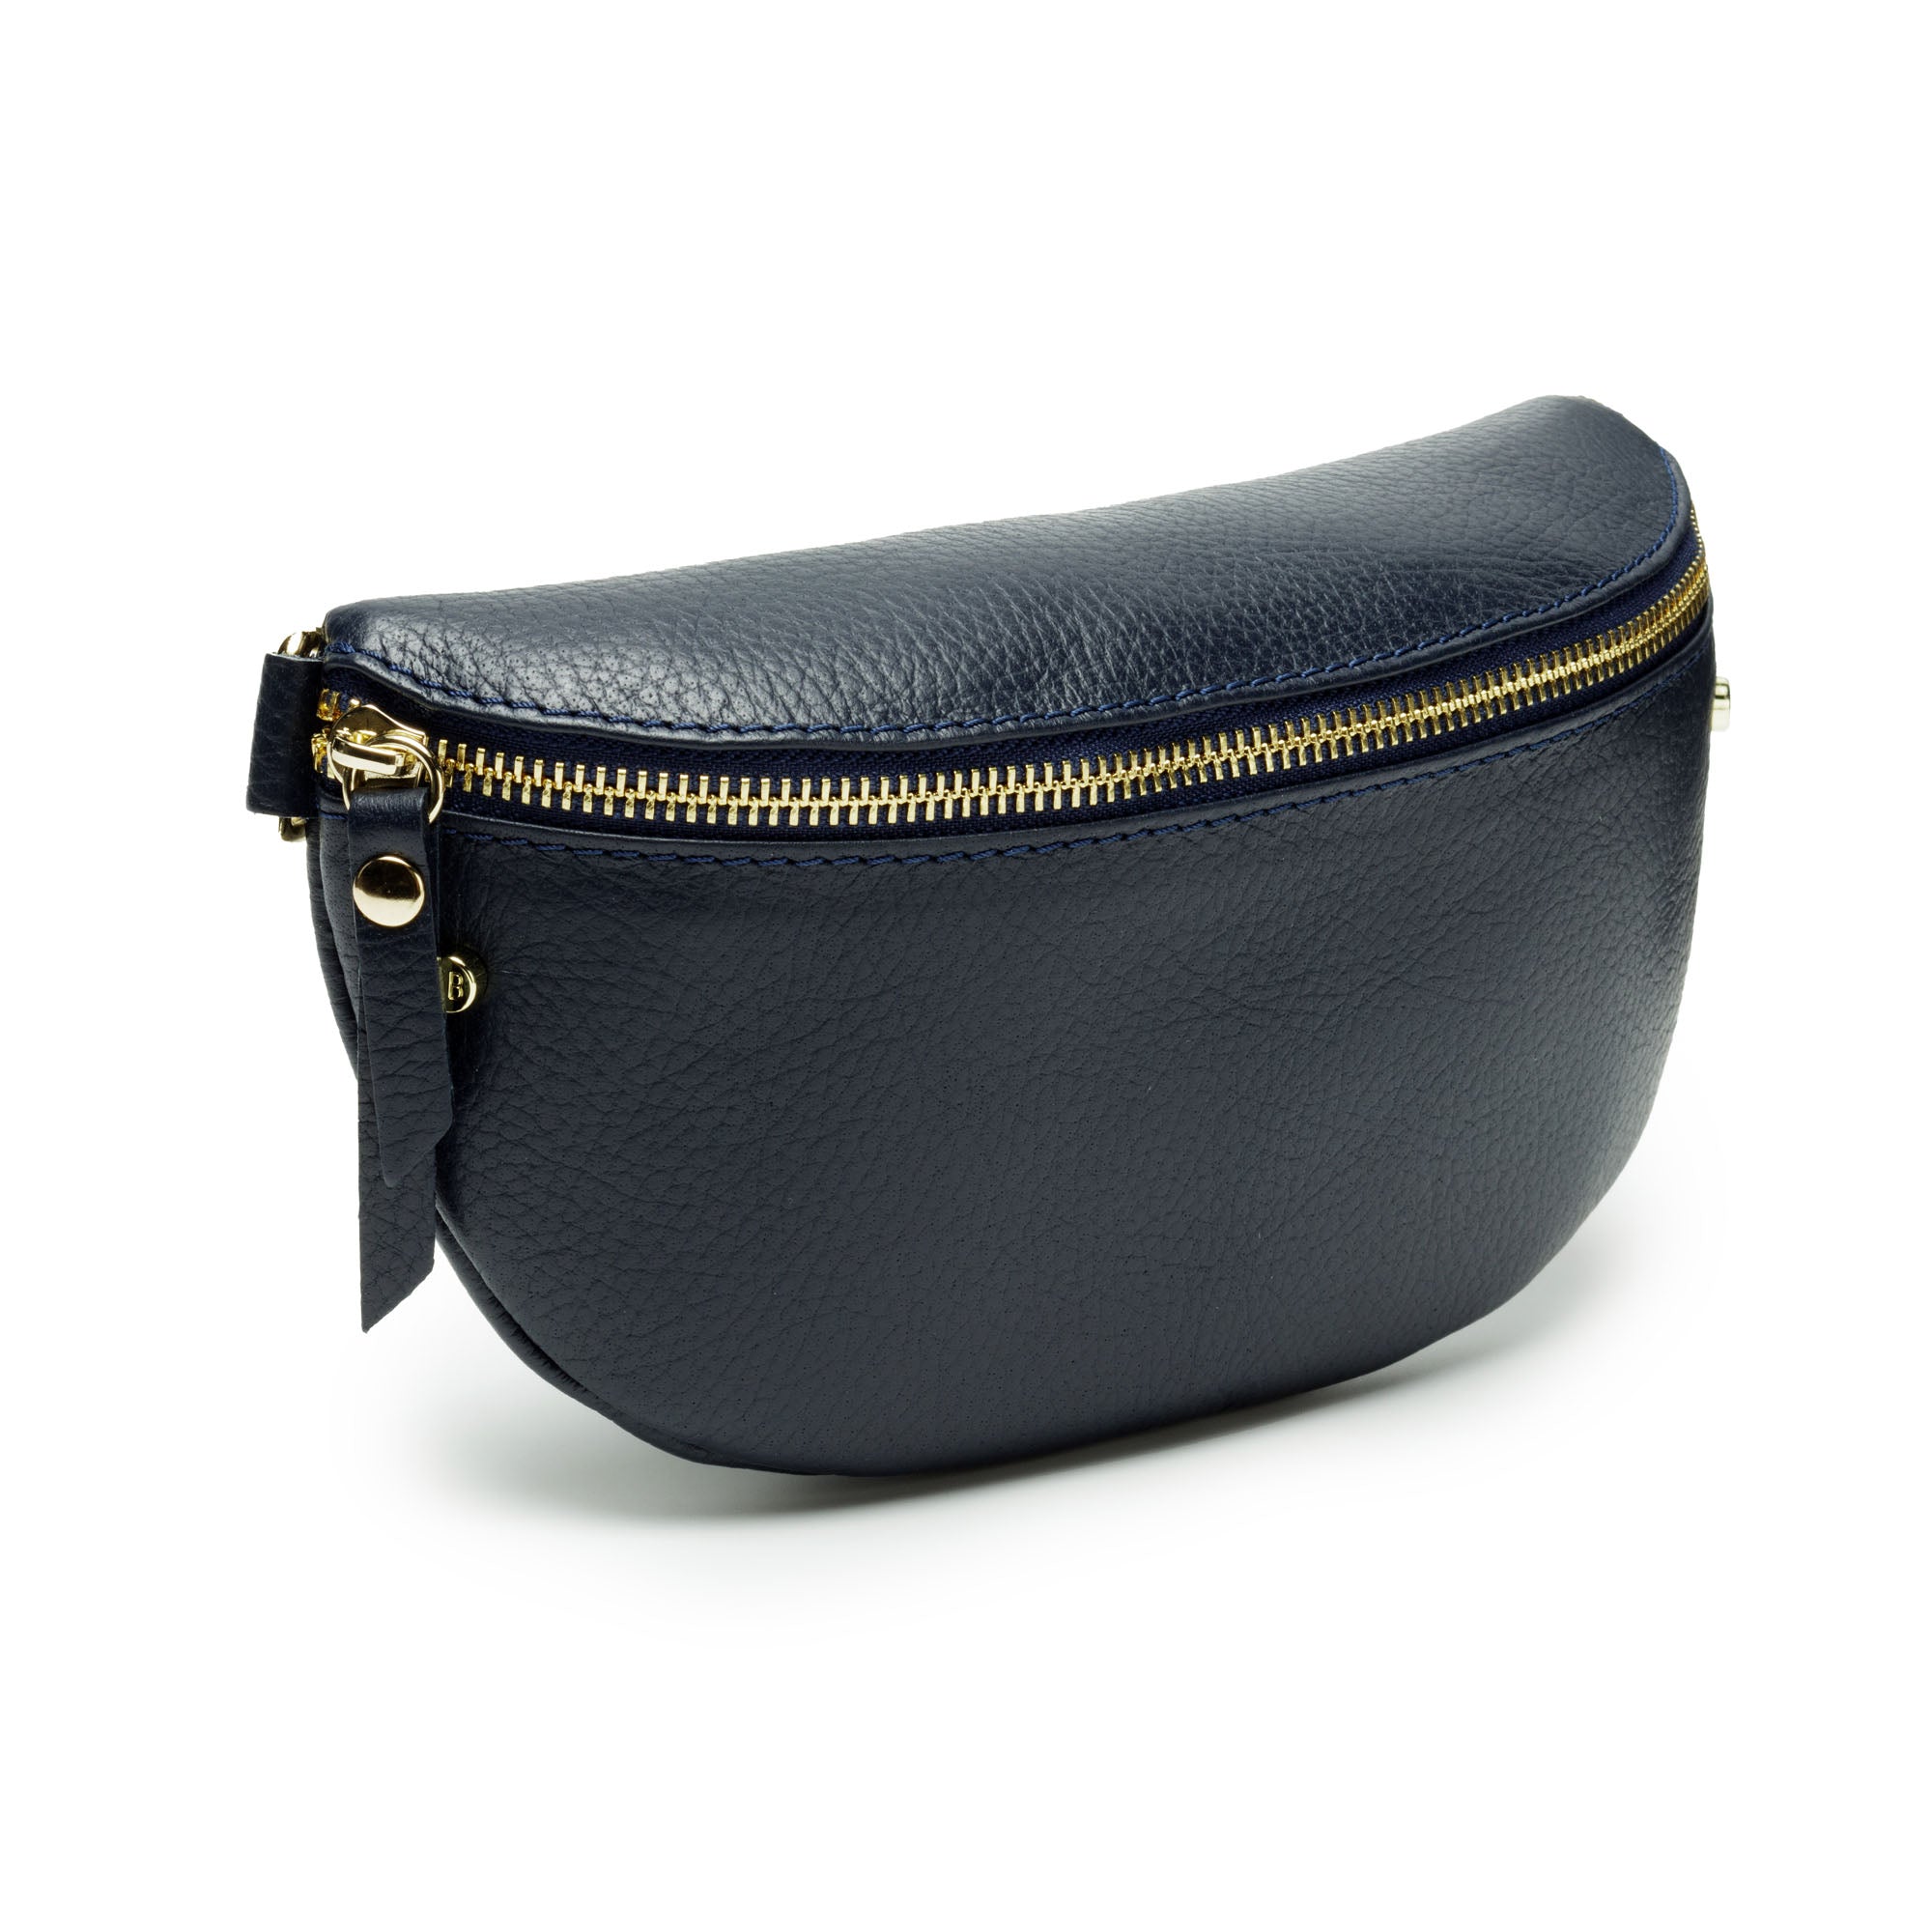 Sling Bag - Navy with Midnight Star Strap